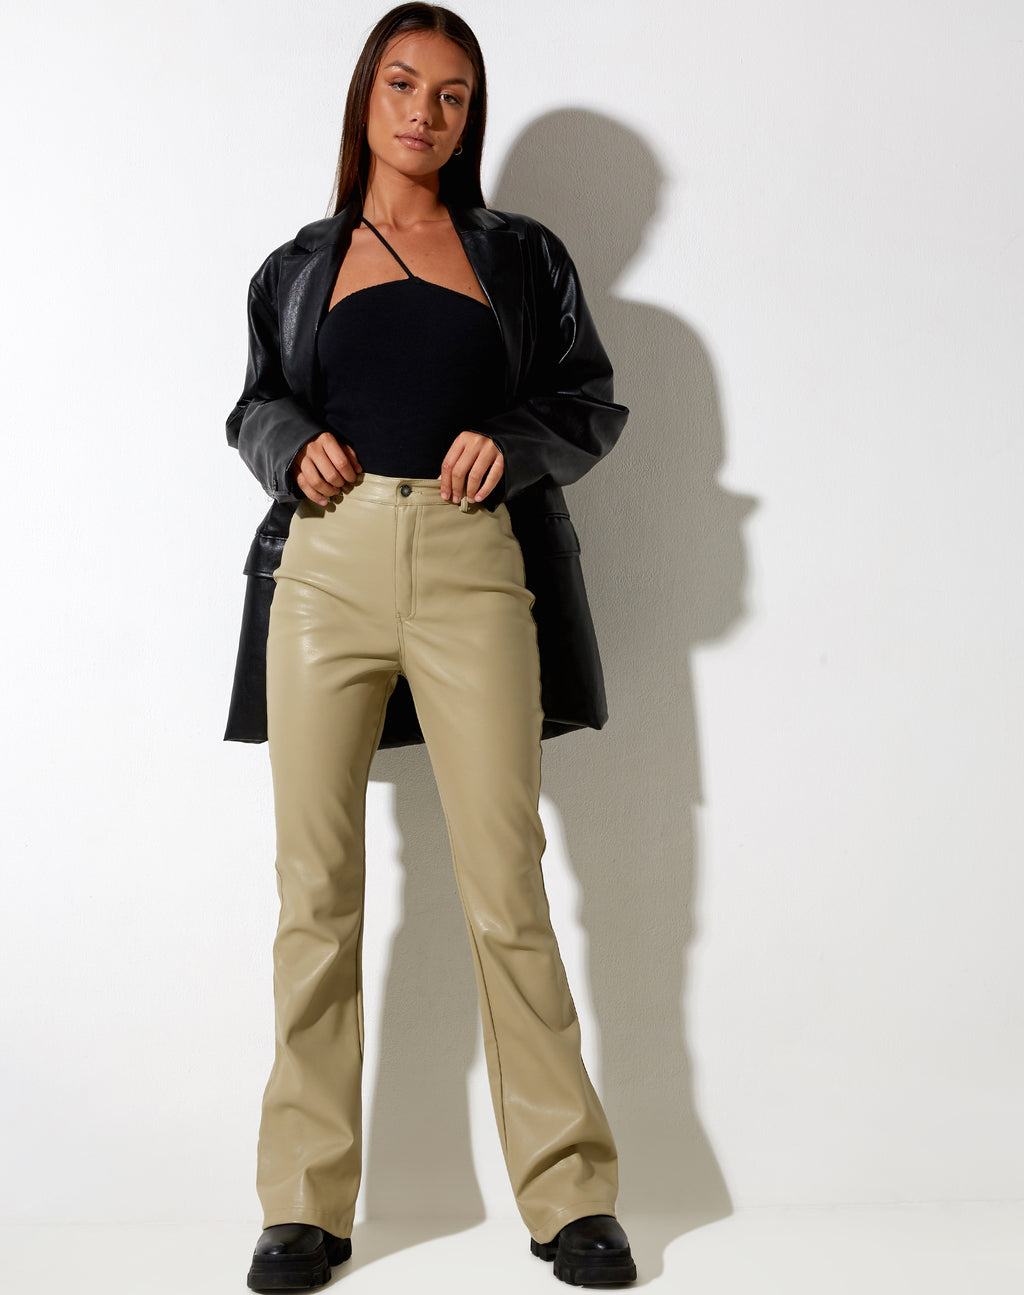 Zoven Flare Trouser in Pu Sage